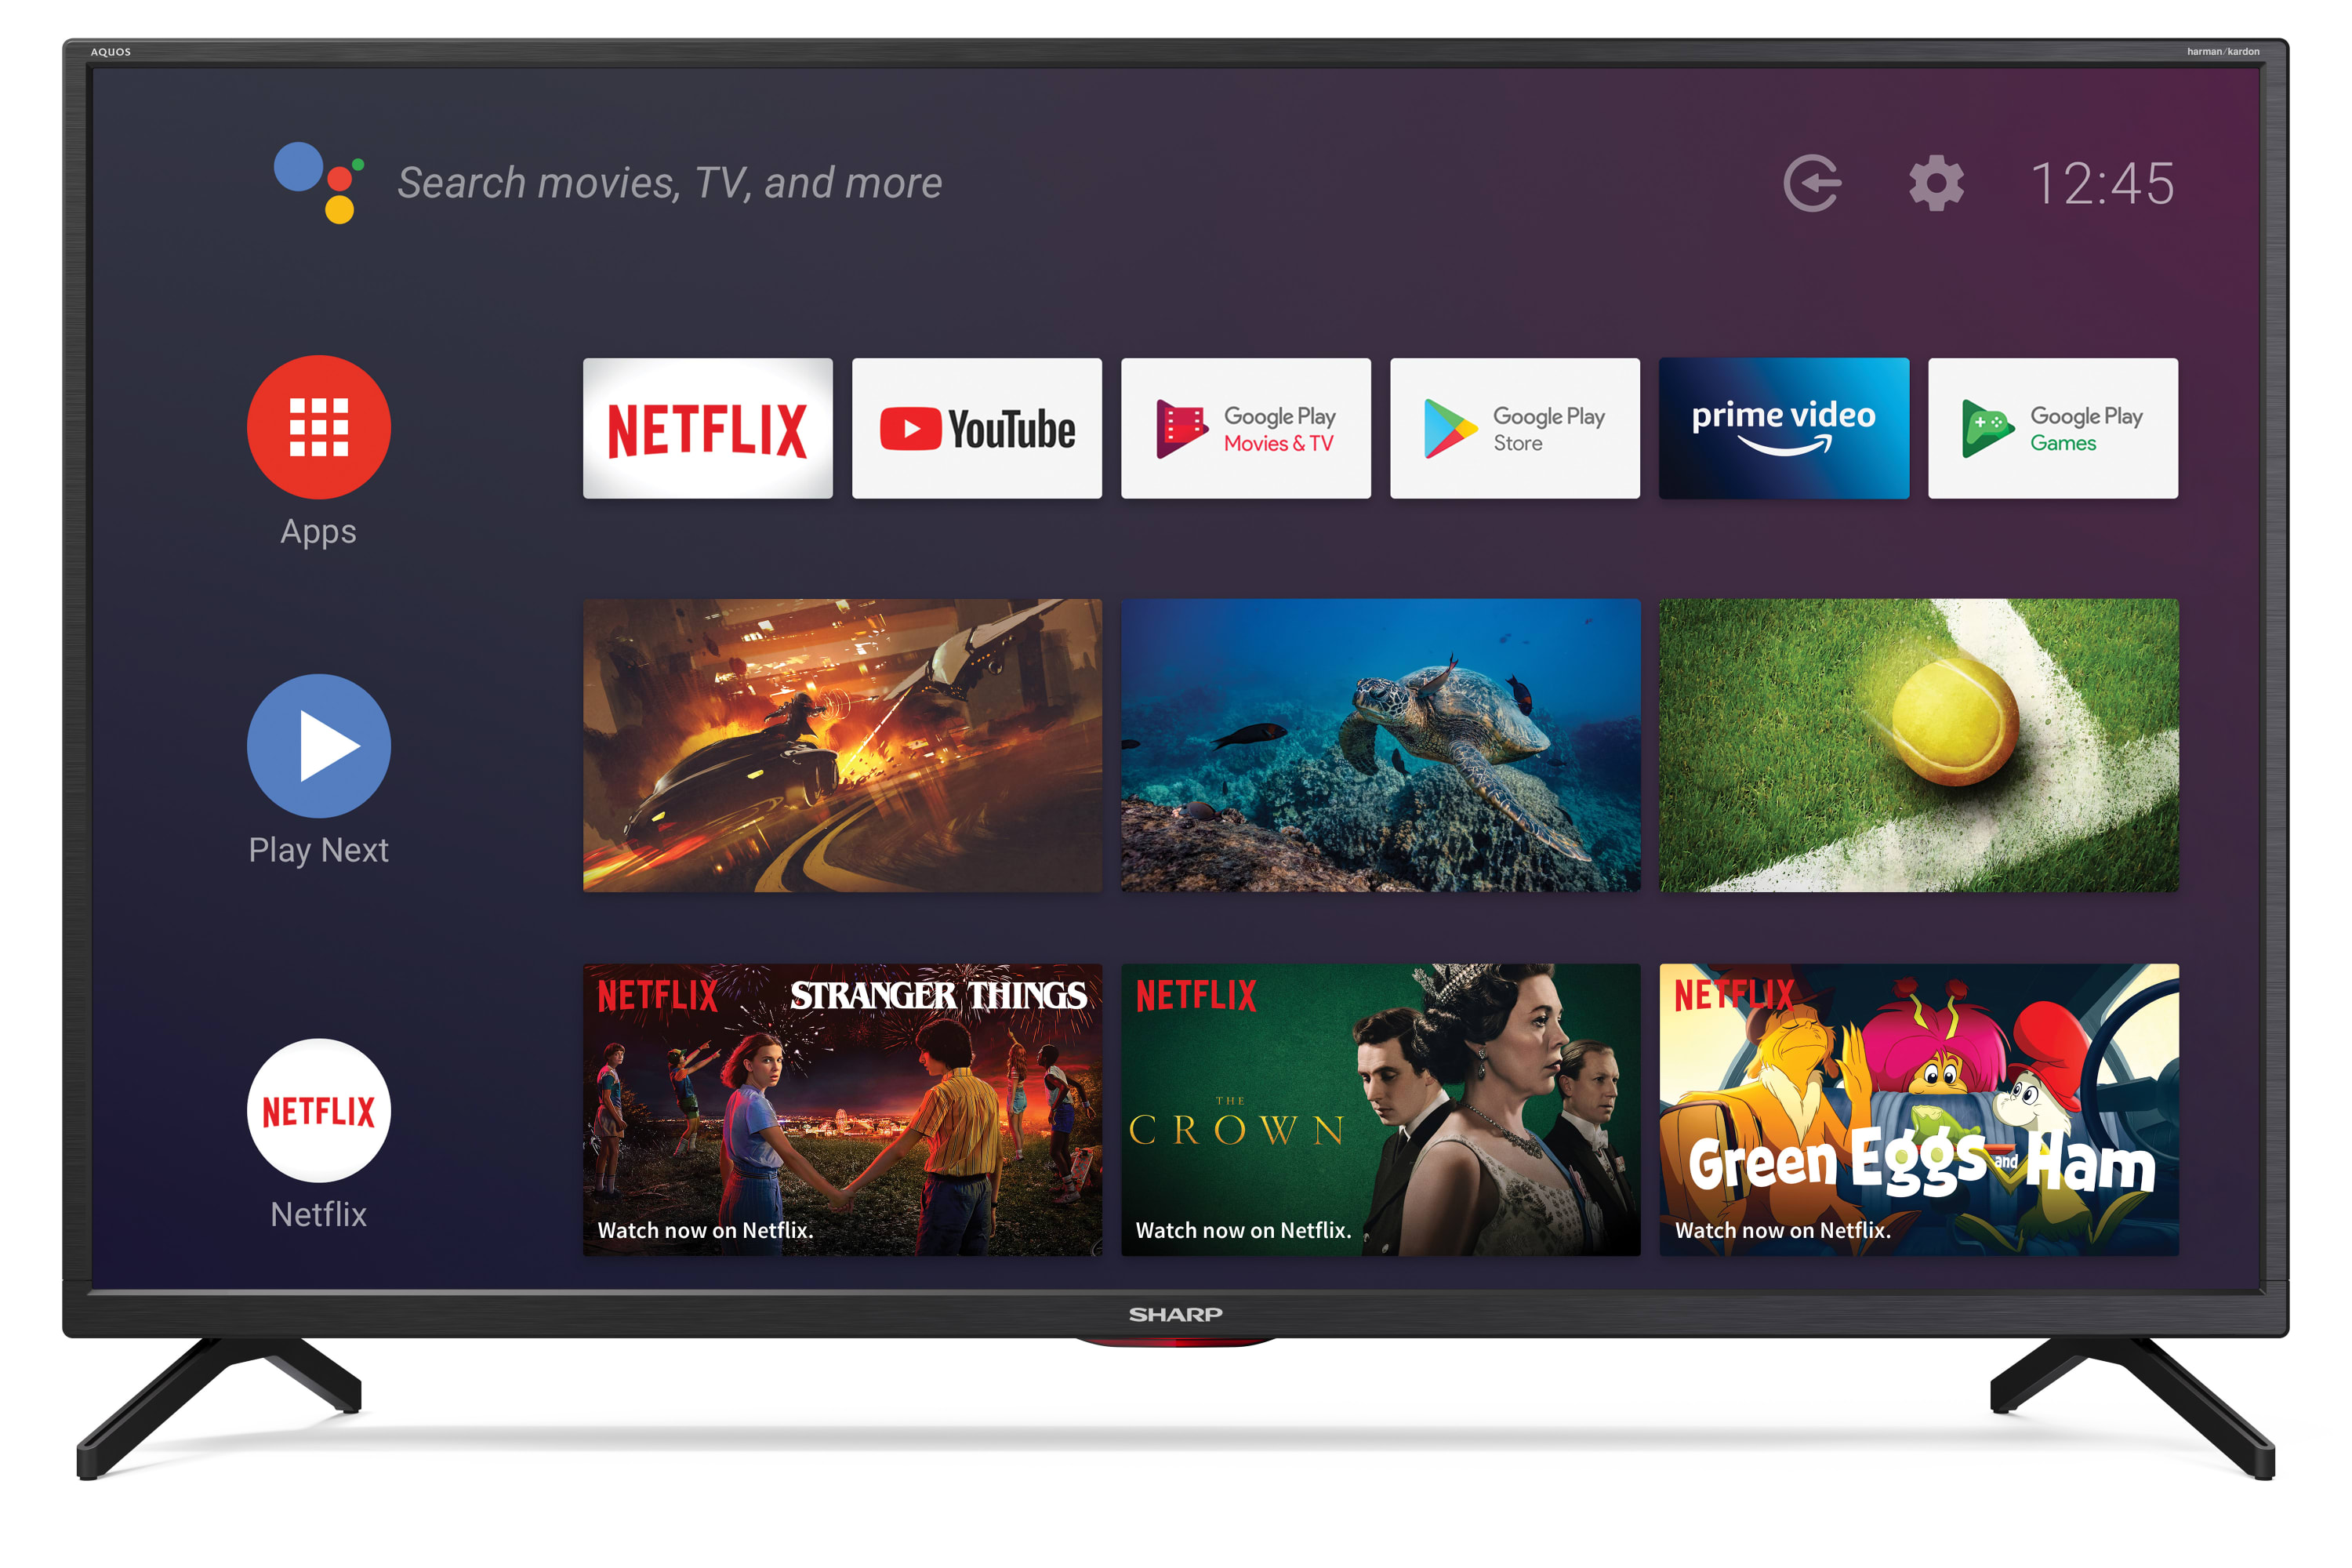 Android TV 4K UHD - 40" ANDROID TV™ ULTRA HD 4K